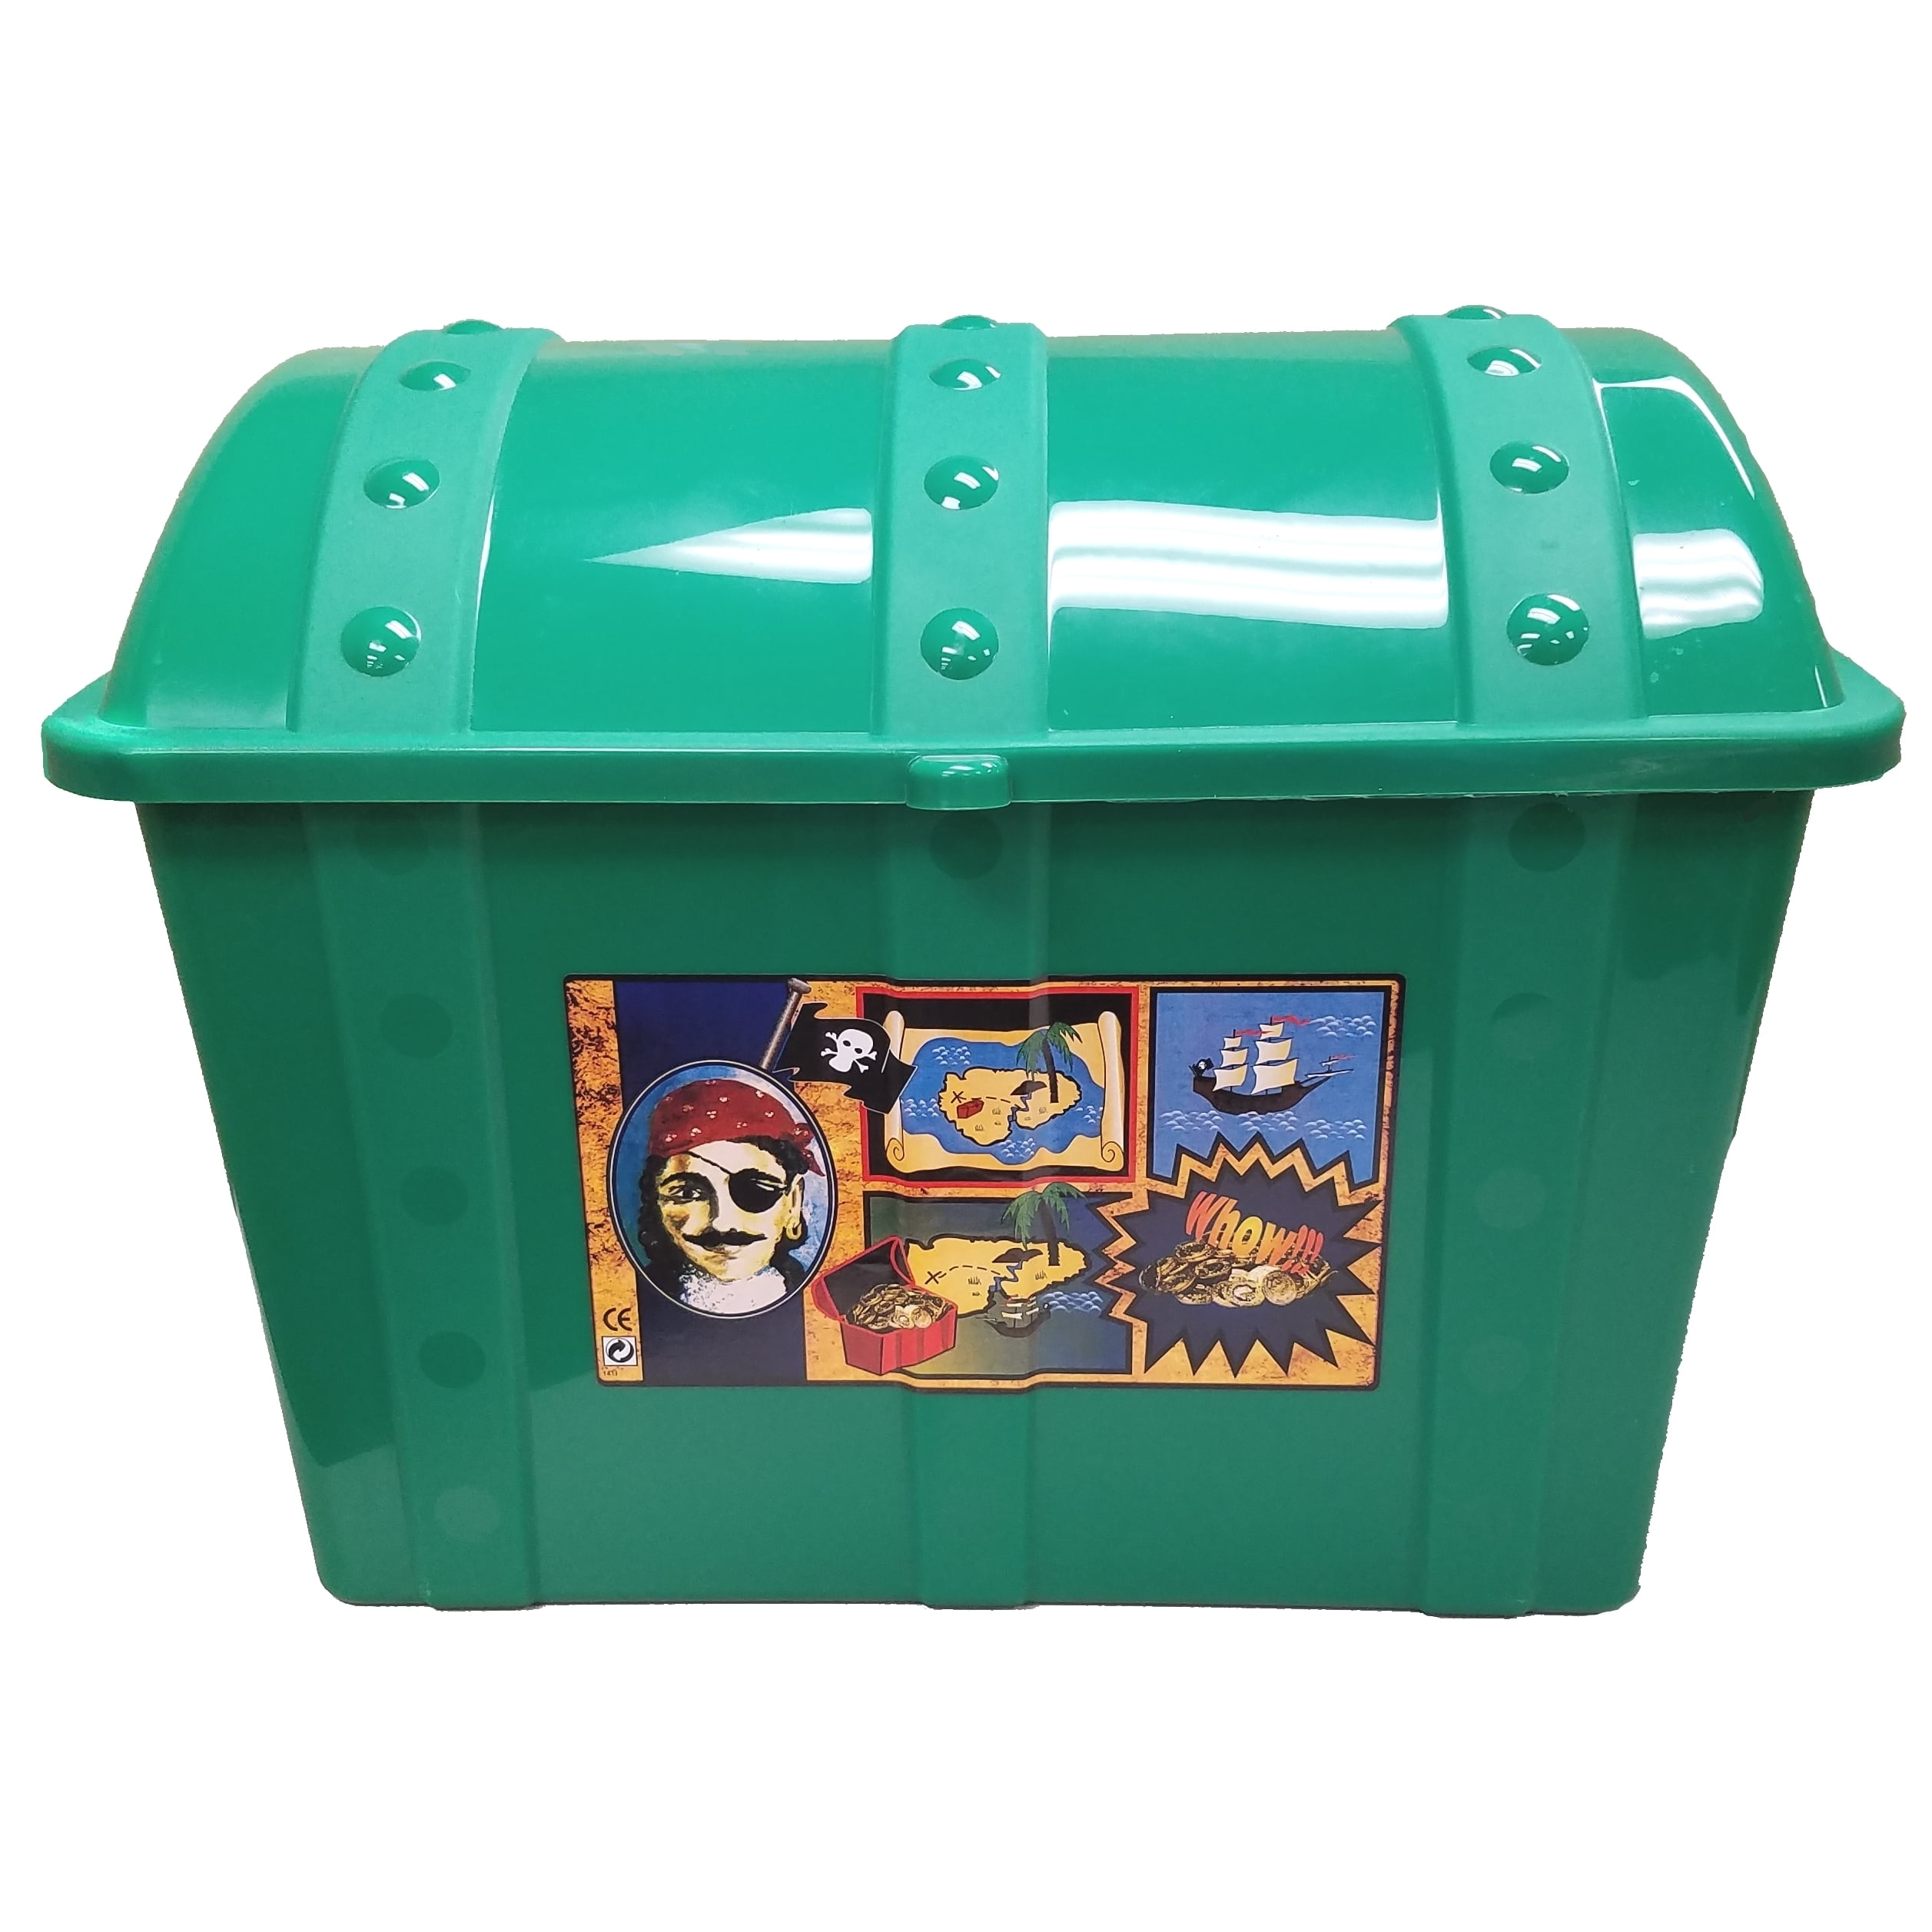 Is it worth buying Treasure Chests?, by Tetlon